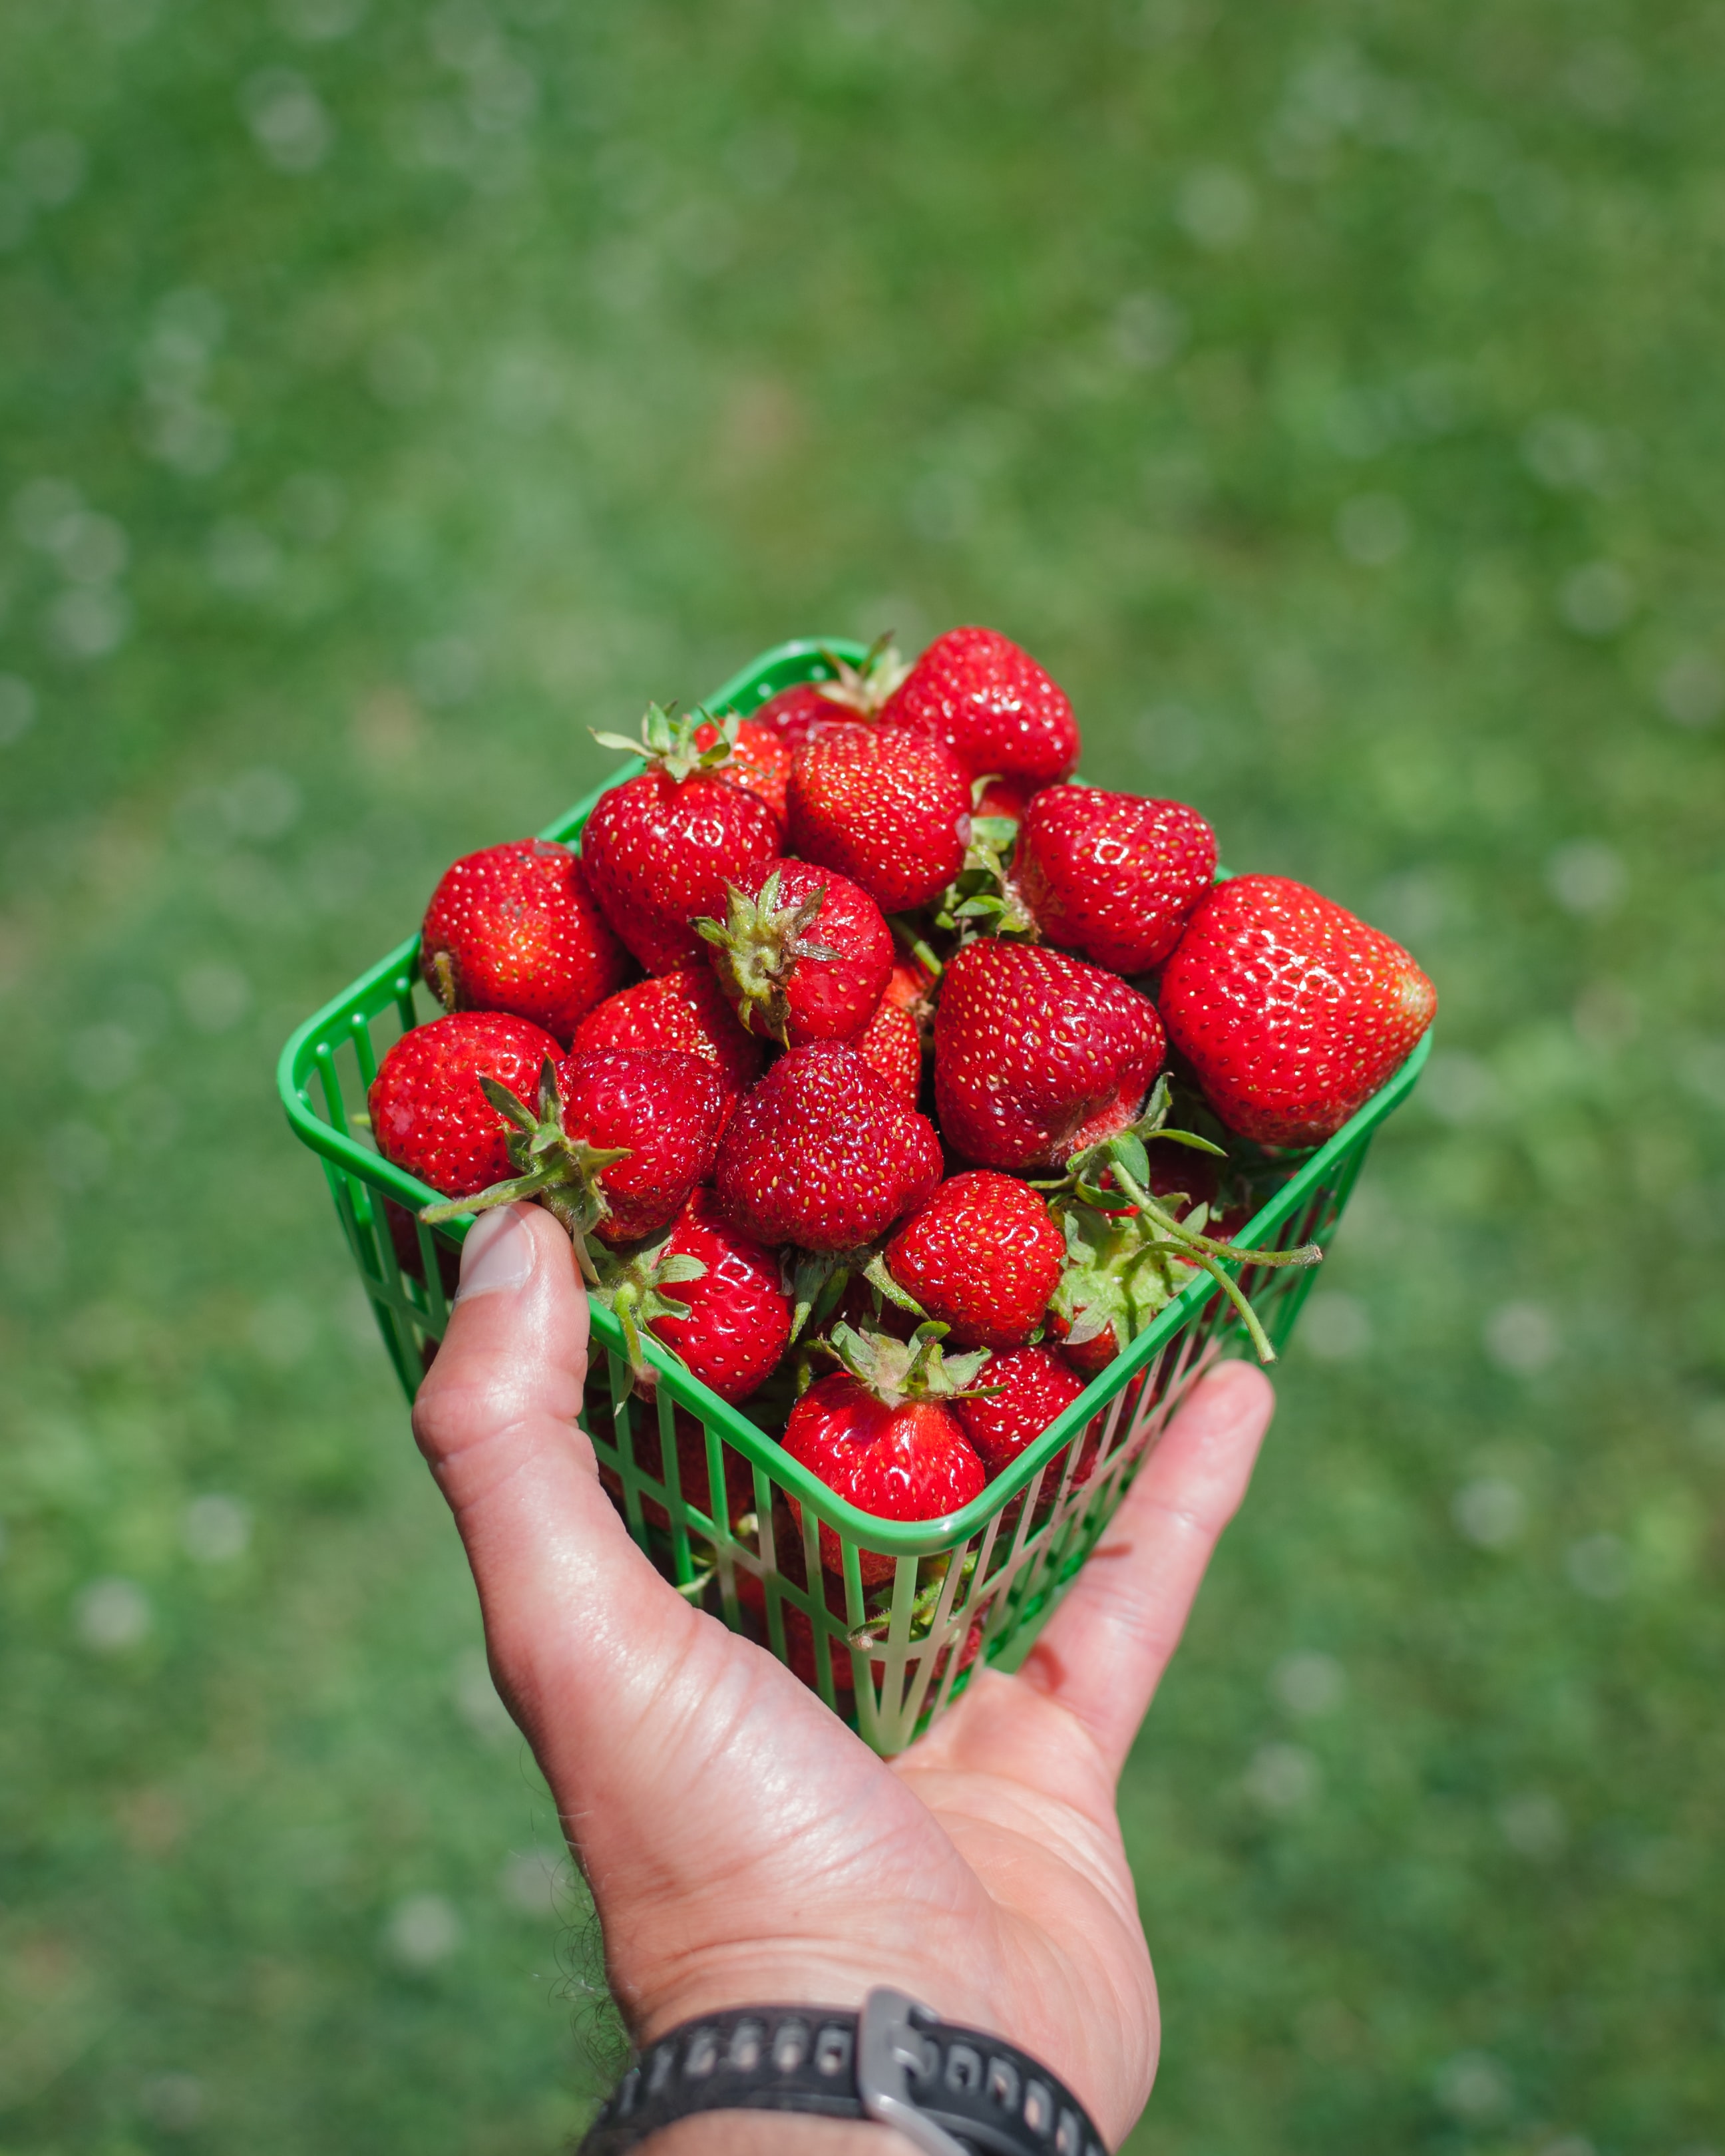 Free download wallpaper Food, Berry, Box, Strawberry, Hand on your PC desktop